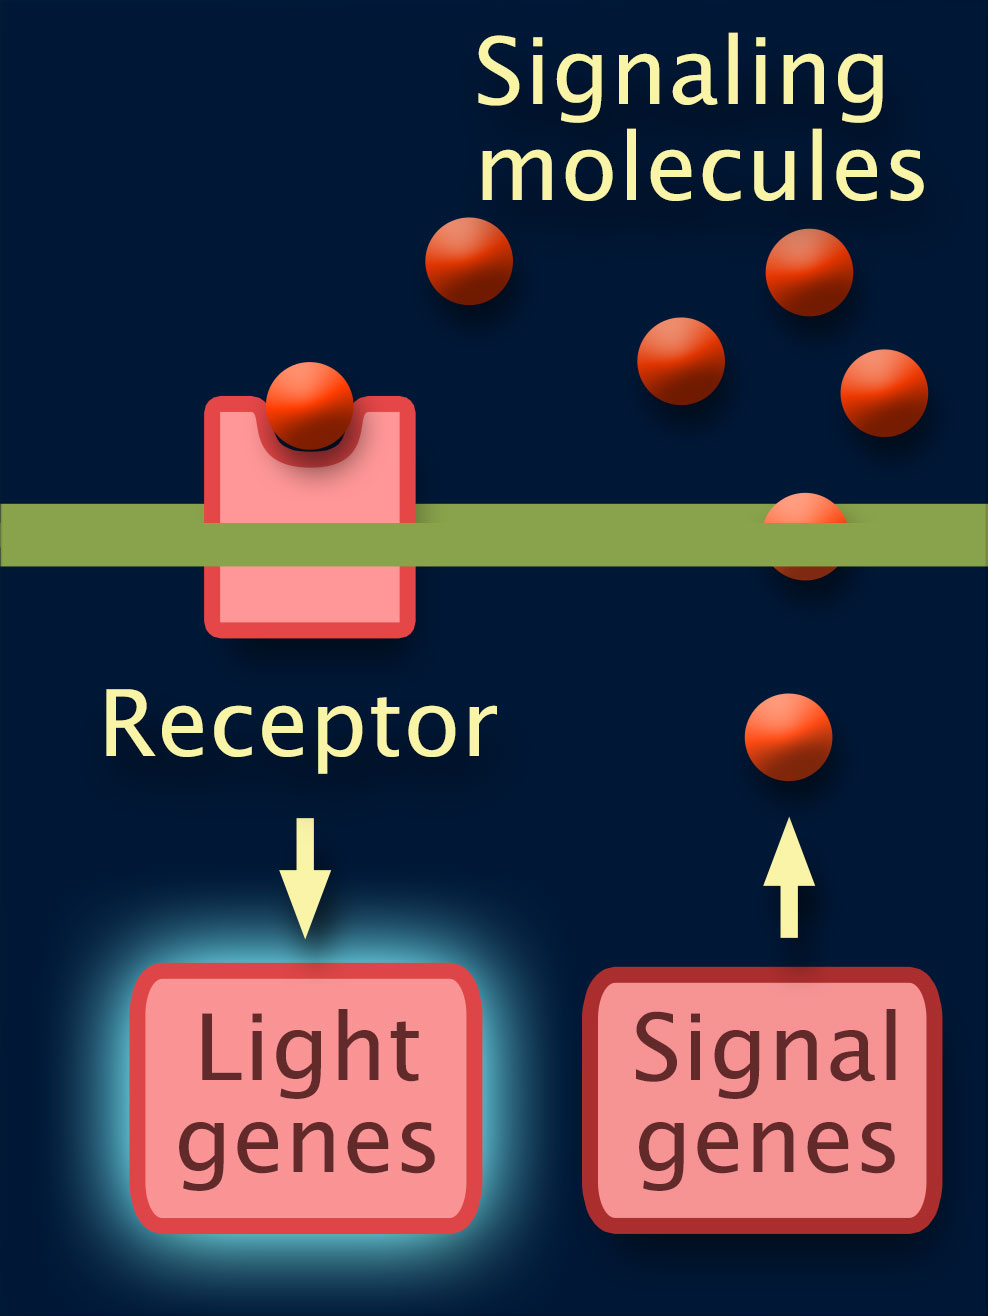 Round balls labeled Signaling molecules move from Signal genes through the cell surface. One is bound to a Receptor with an arrow pointing to Light genes which is turned on.